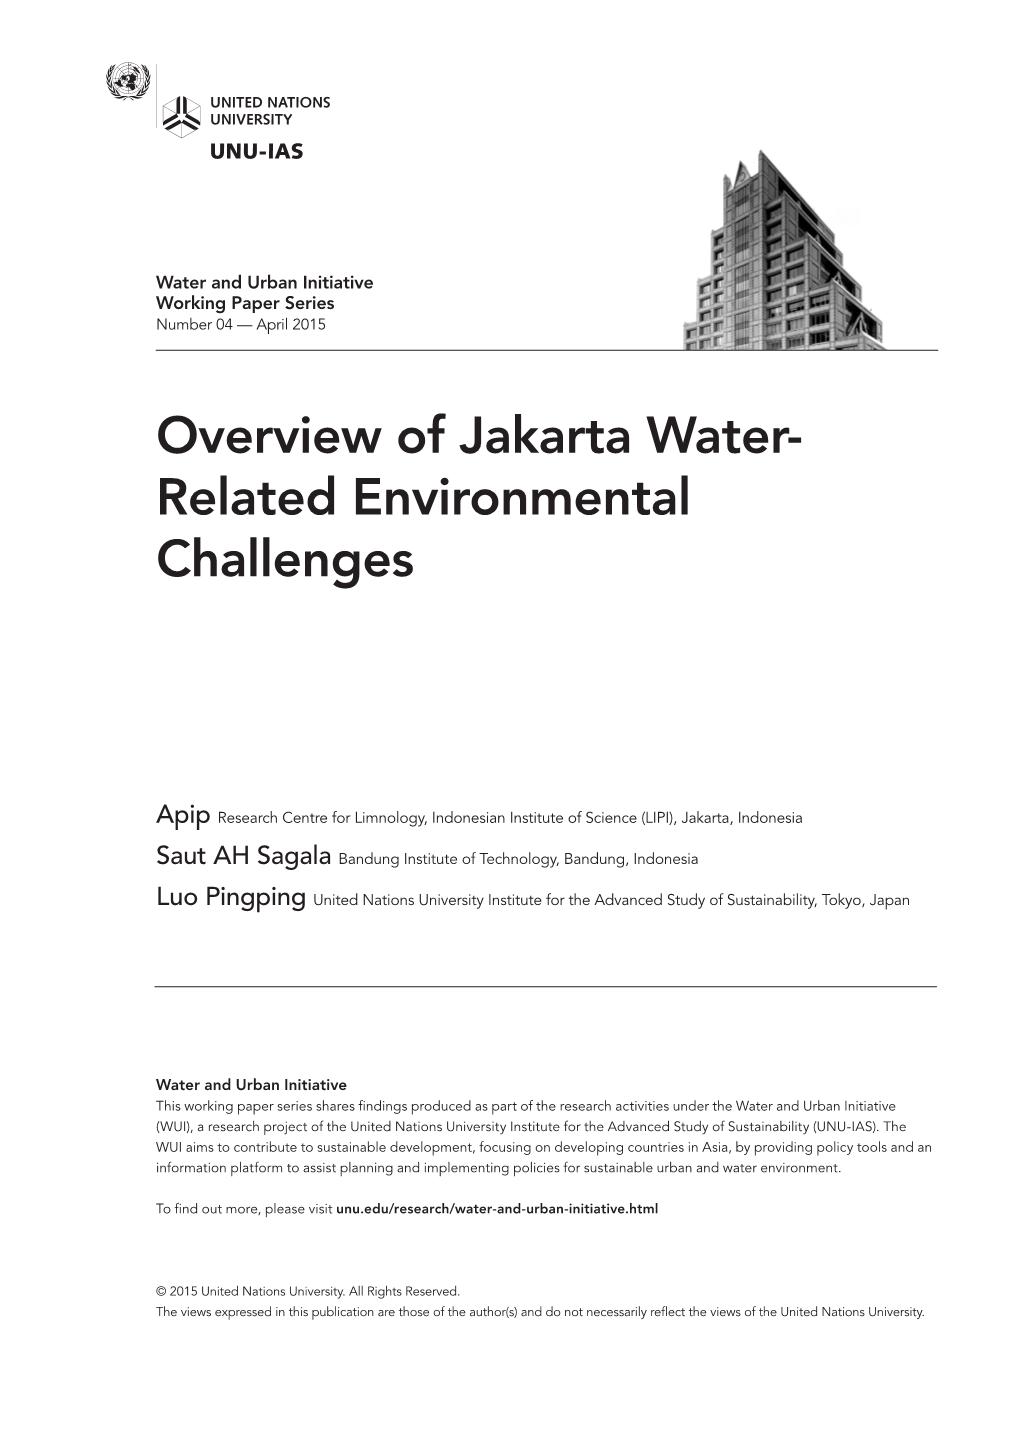 Overview of Jakarta Water- Related Environmental Challenges